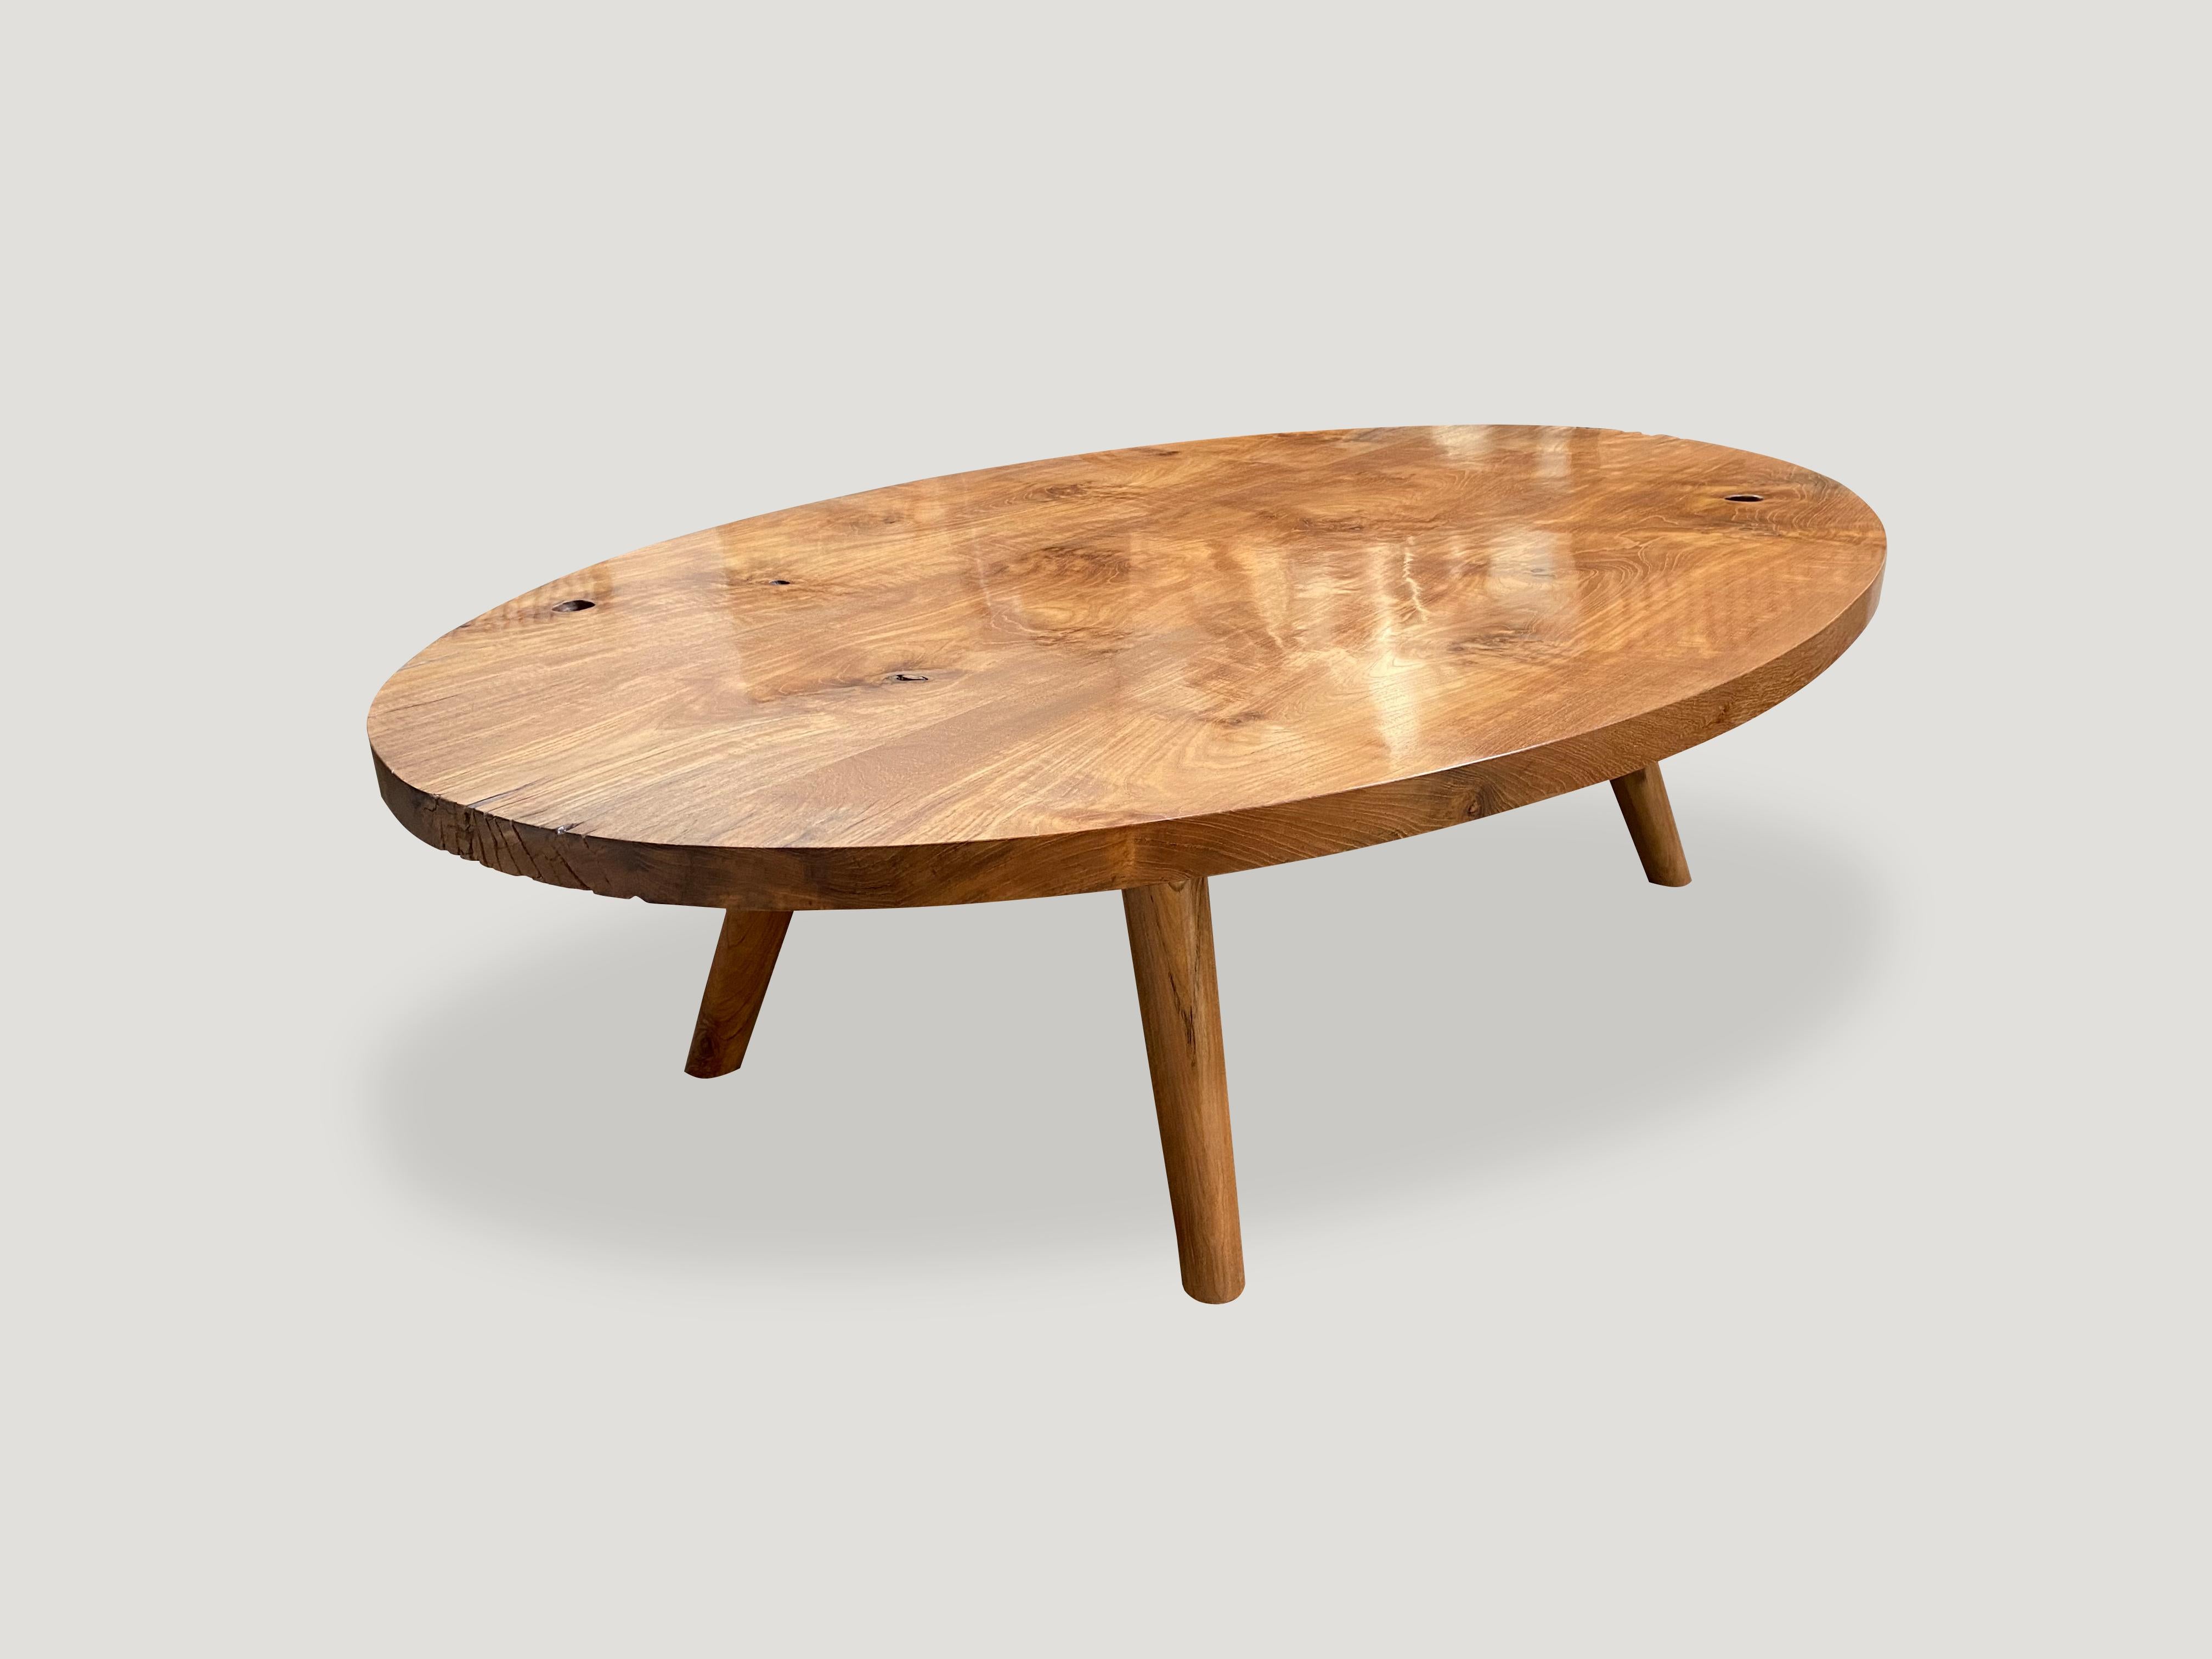 Beautiful grain on this natural reclaimed teak wood oval coffee table. Three slabs were joined to produce a minimalist mid century style coffee table.

Own an Andrianna Shamaris original.

Andrianna Shamaris. The Leader In Modern Organic Design.